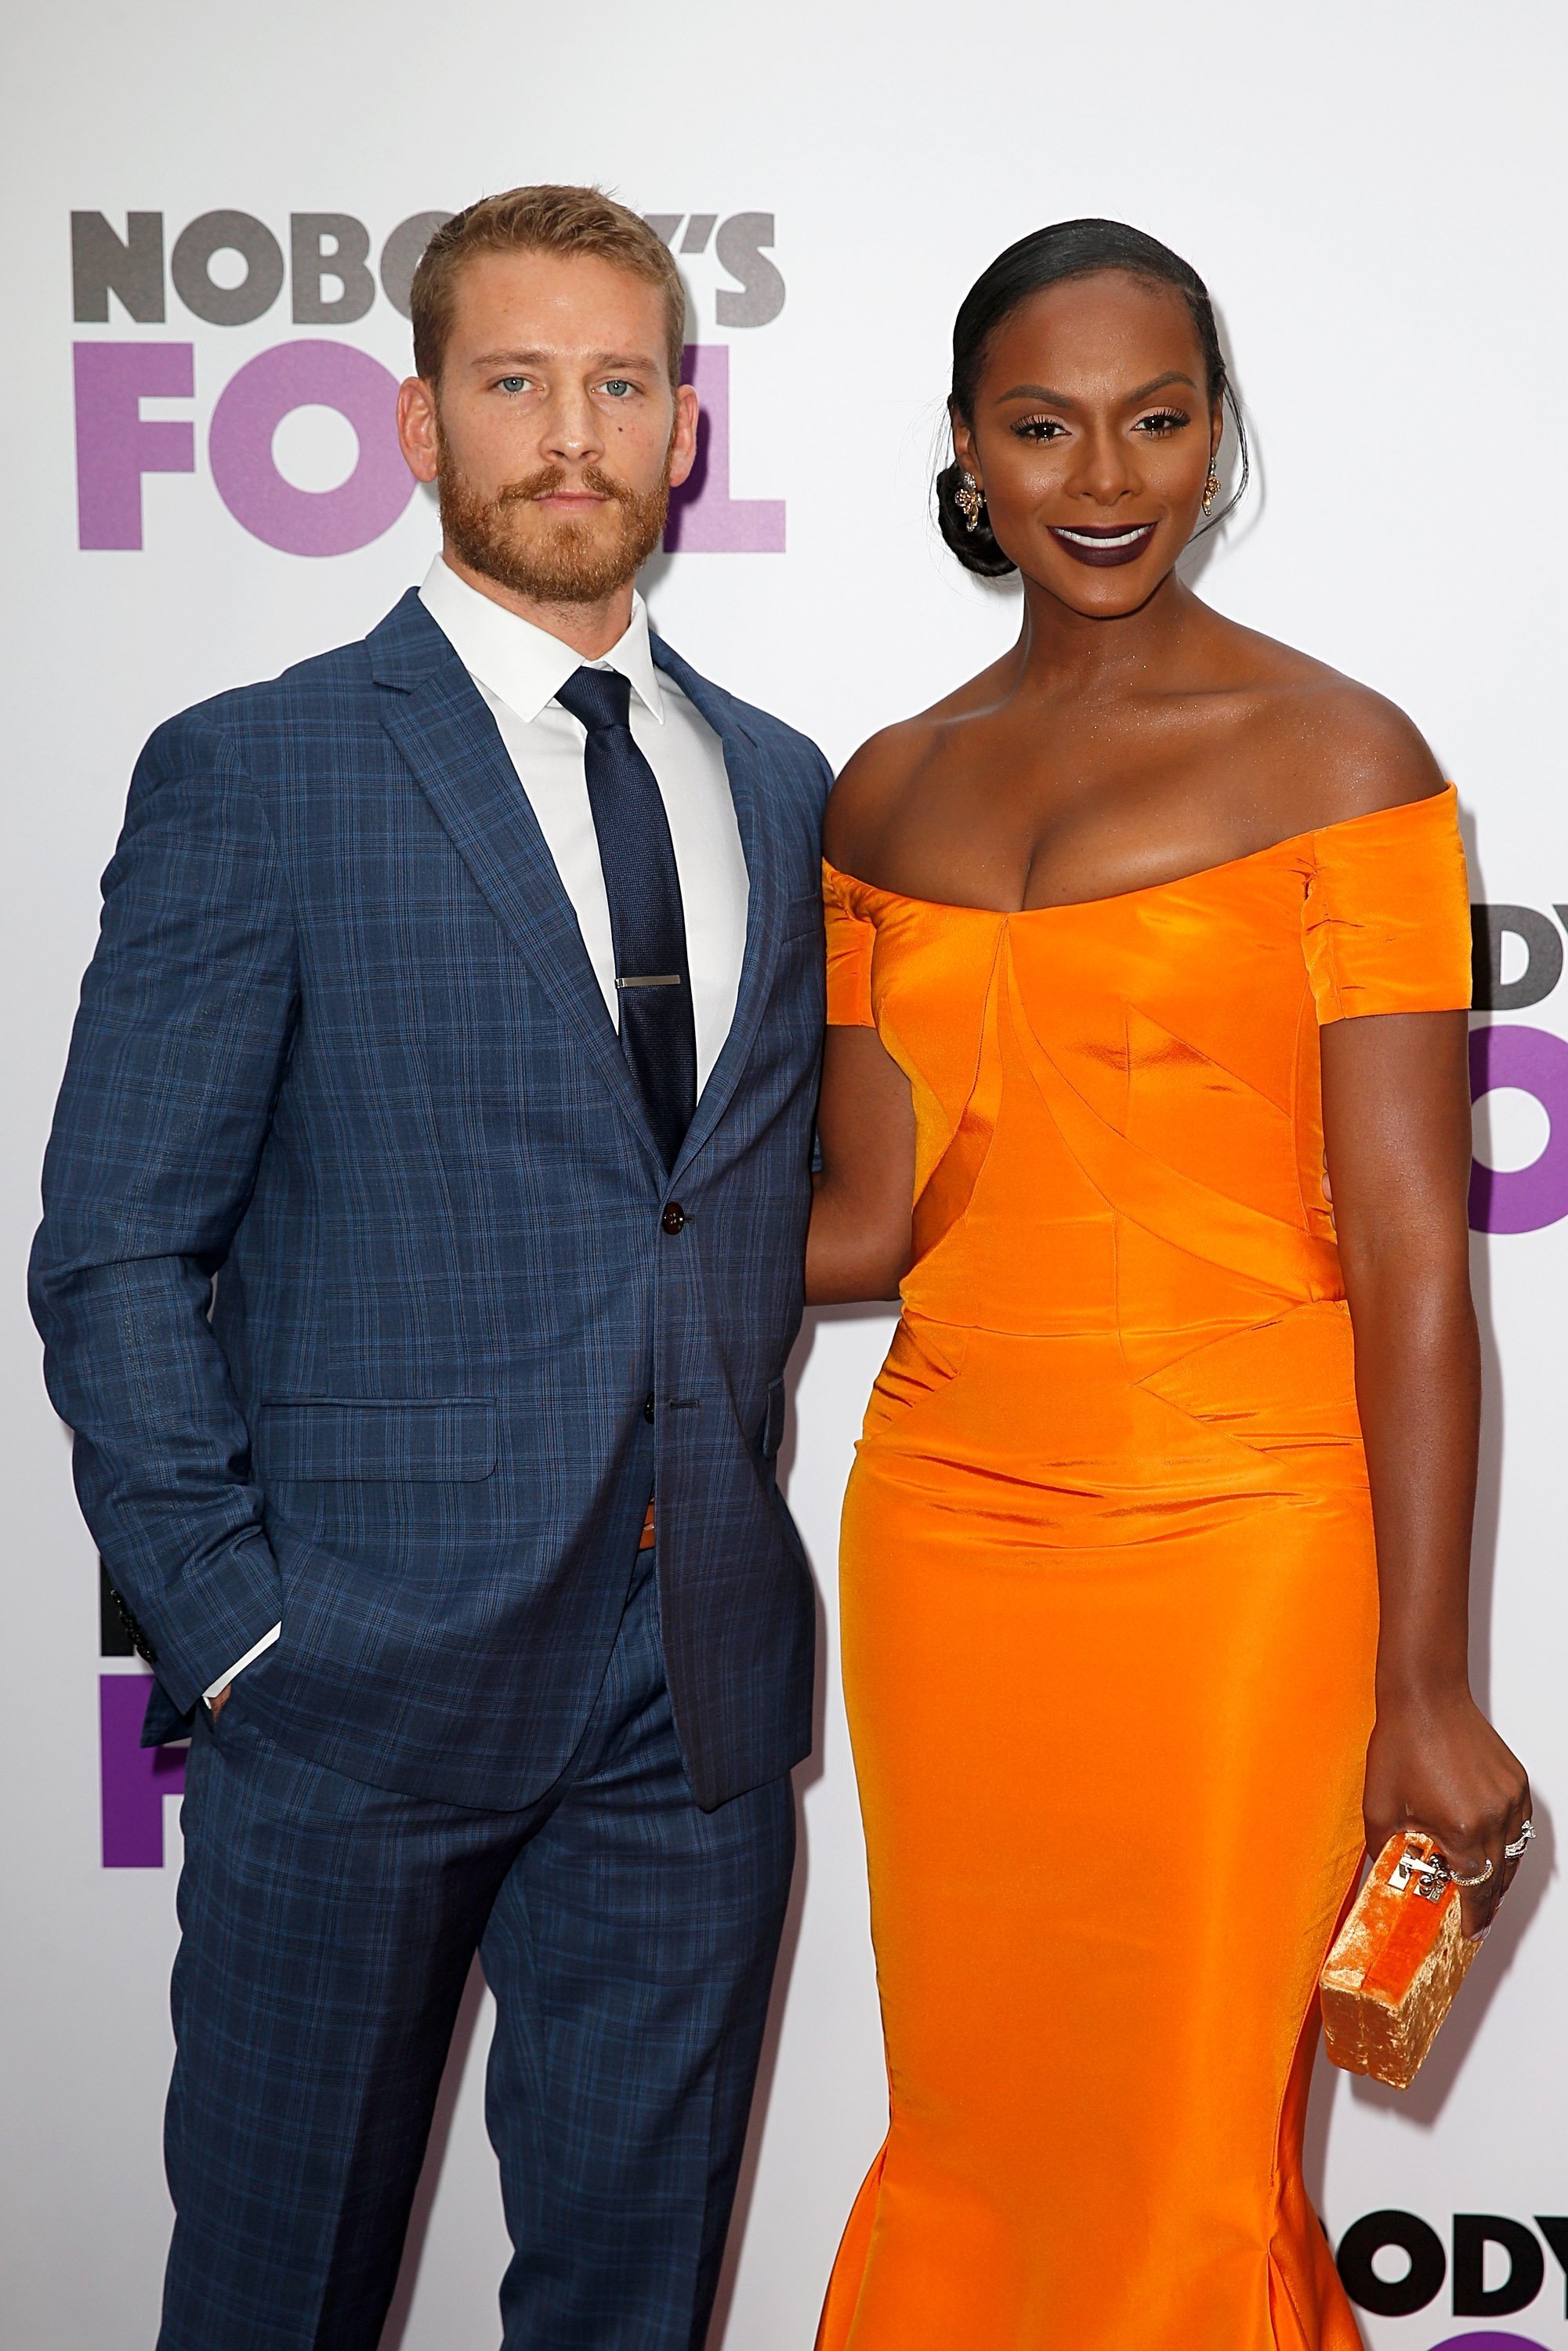 Nick James and Tika Sumpter at the premiere of "Nobody's Fool" in October 2018. | Photo: Getty Images